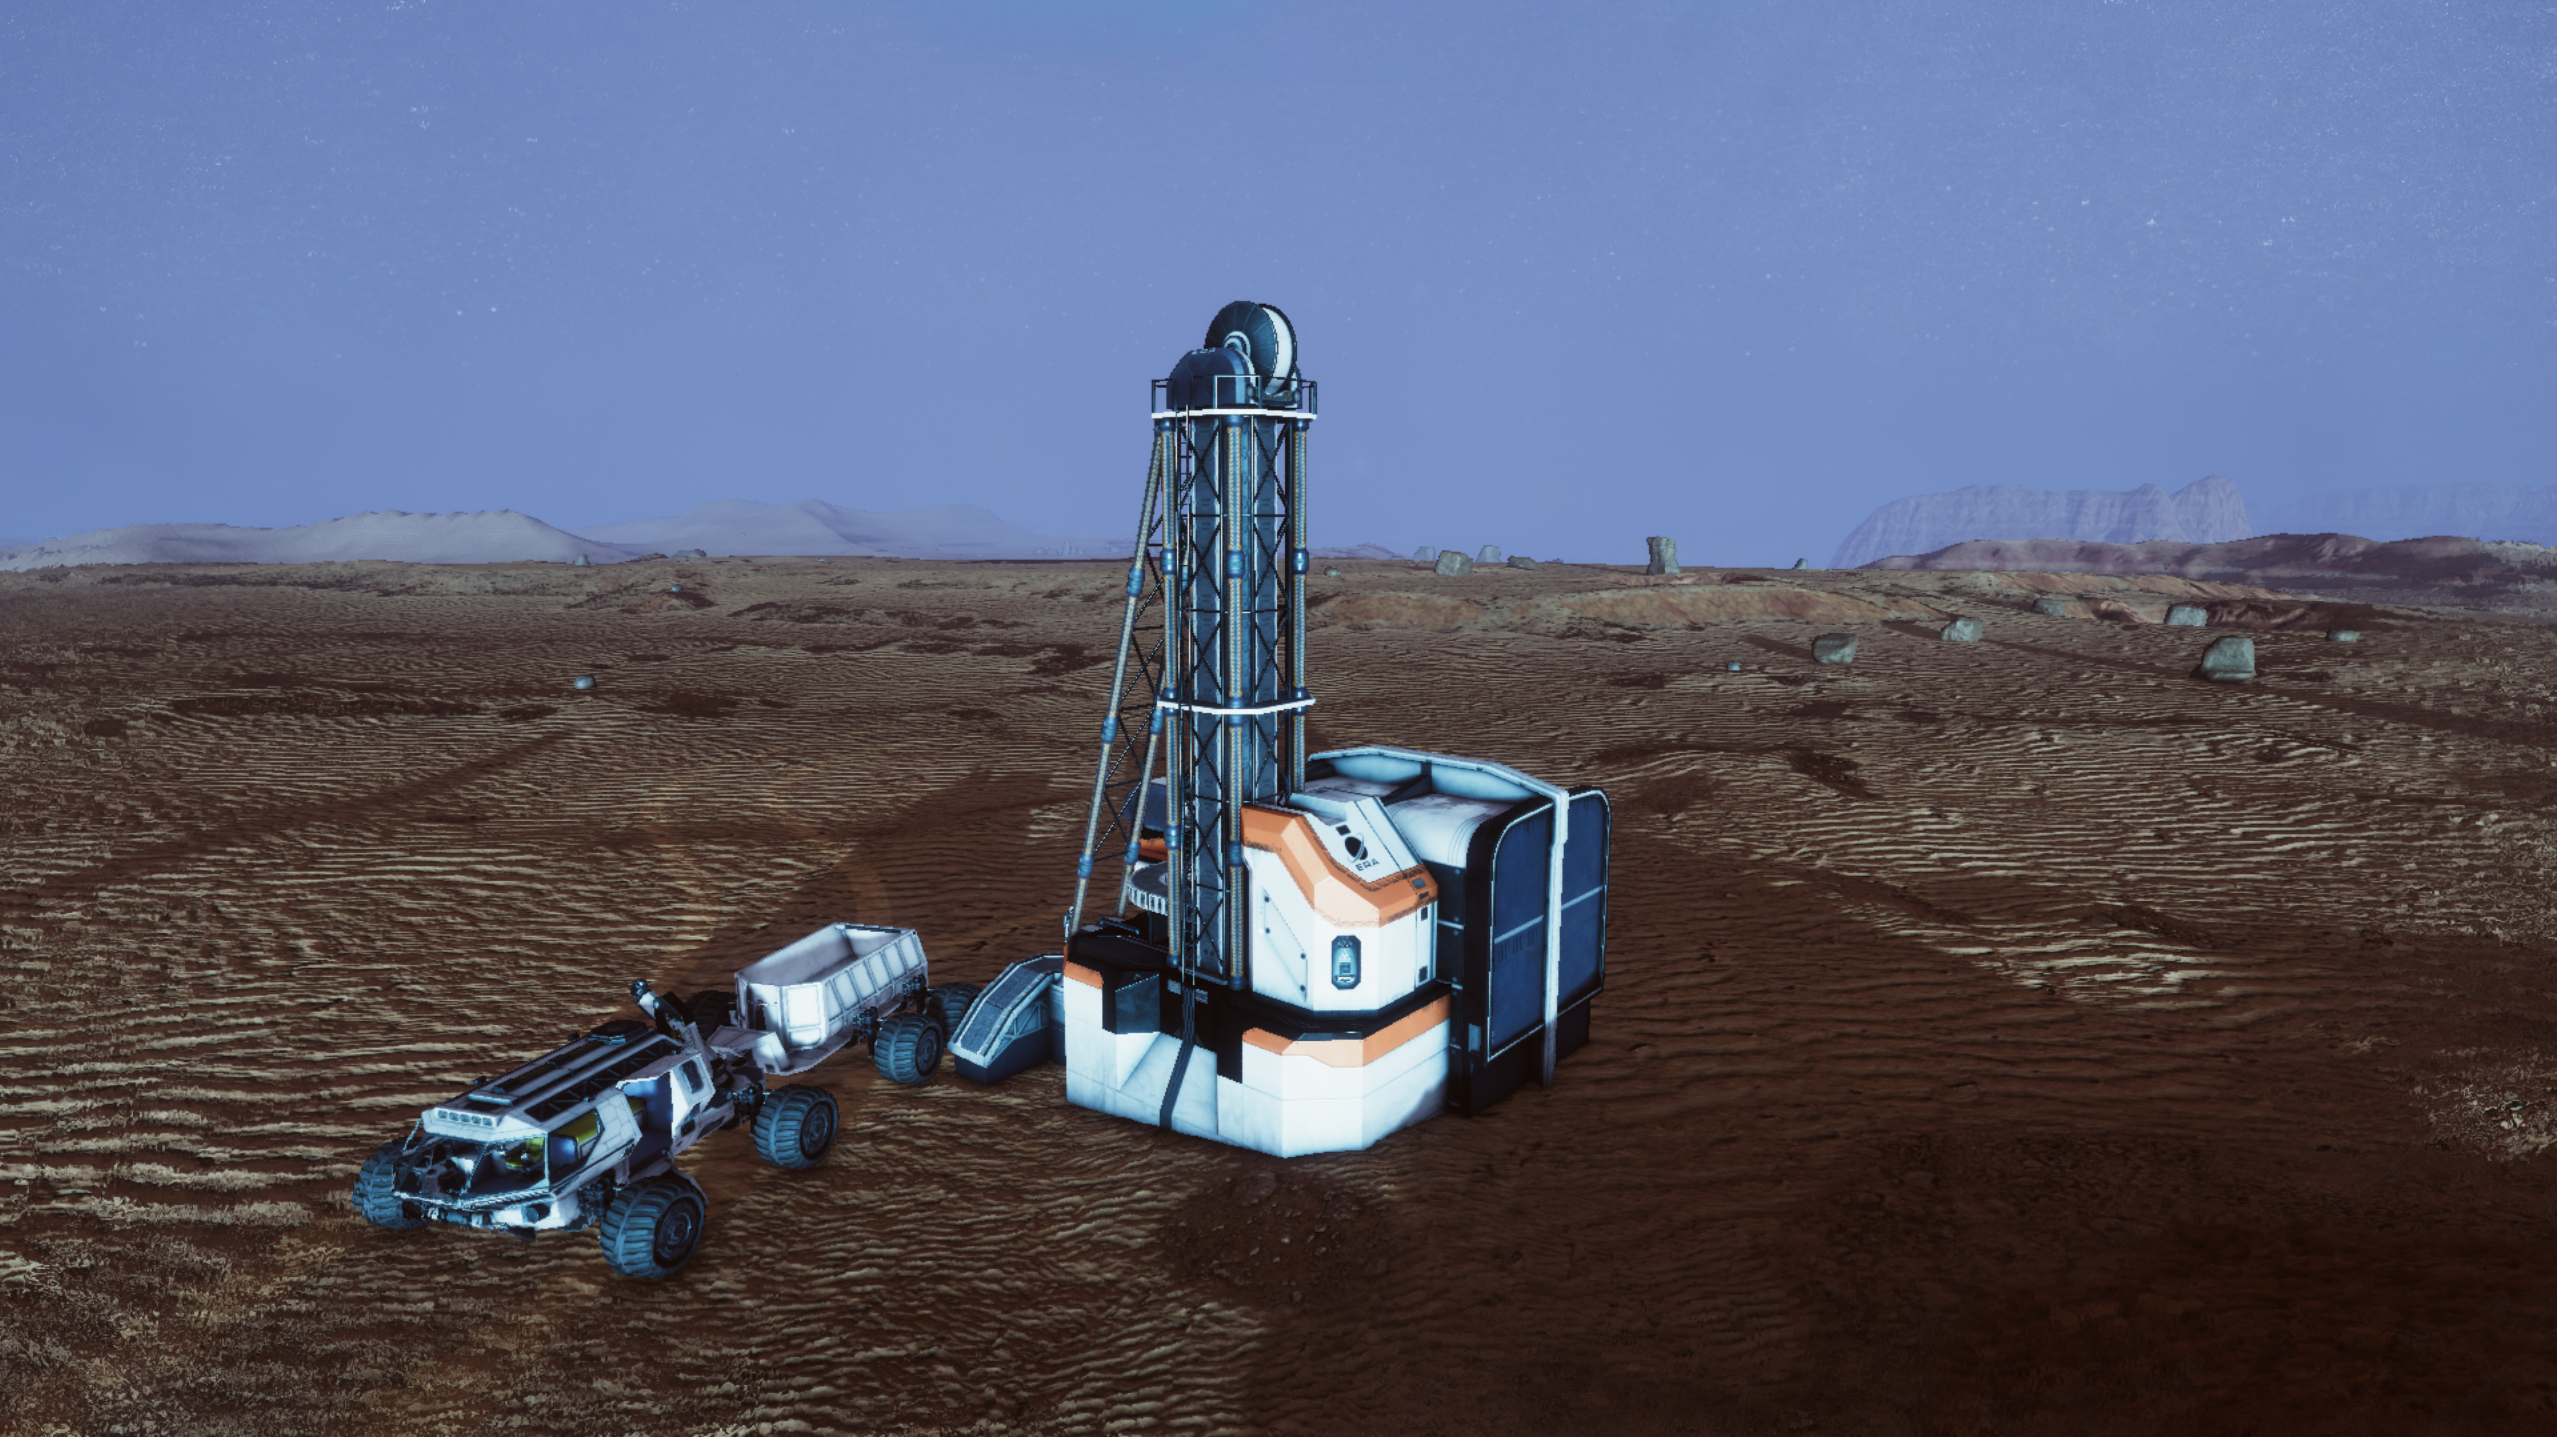 Fort Solis Review: Mars Rover Without A Cause